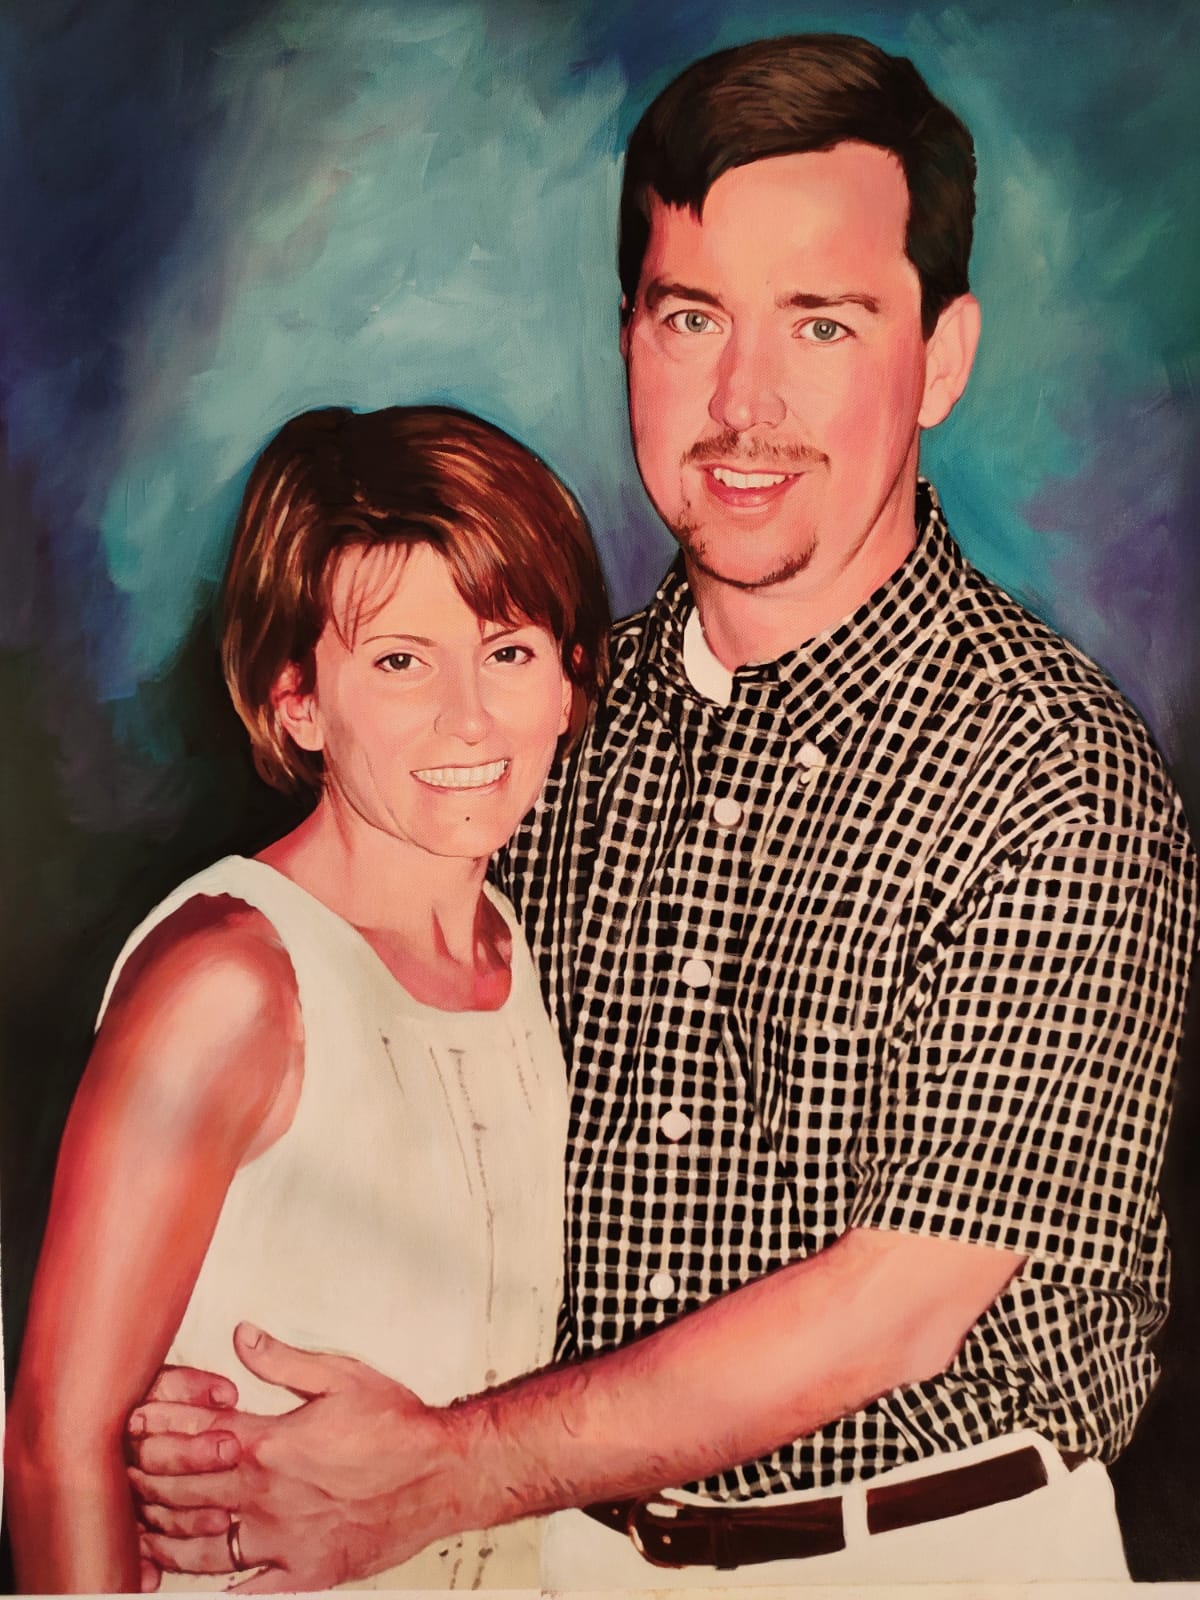 couple portrait painting, painting from photo, photo to painting, commissioned art, art commission, 